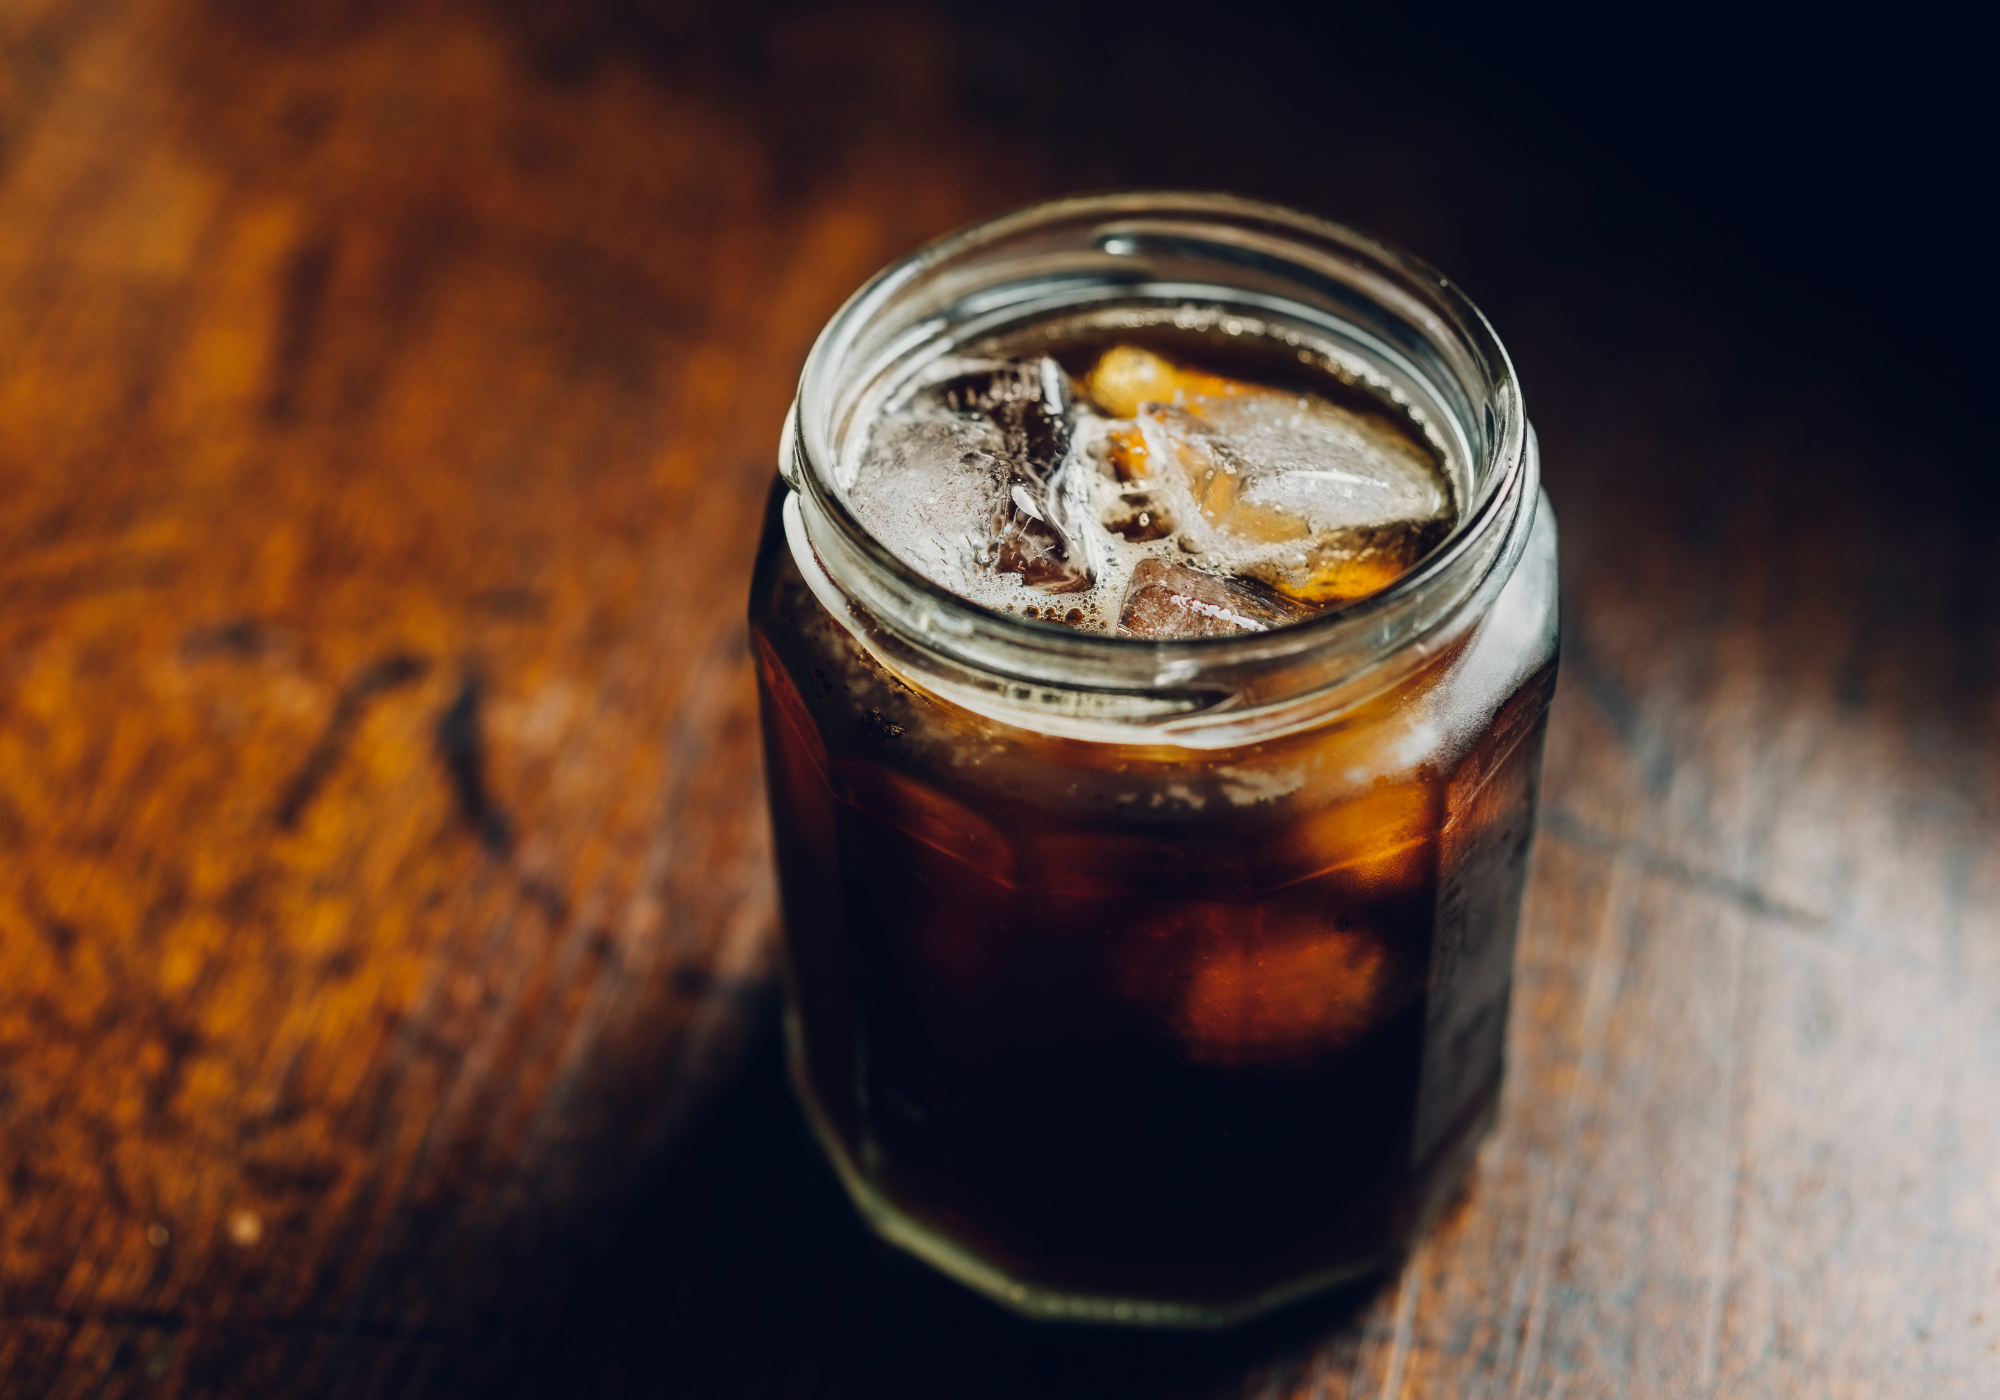 Have you dabbled with cold brew yet?